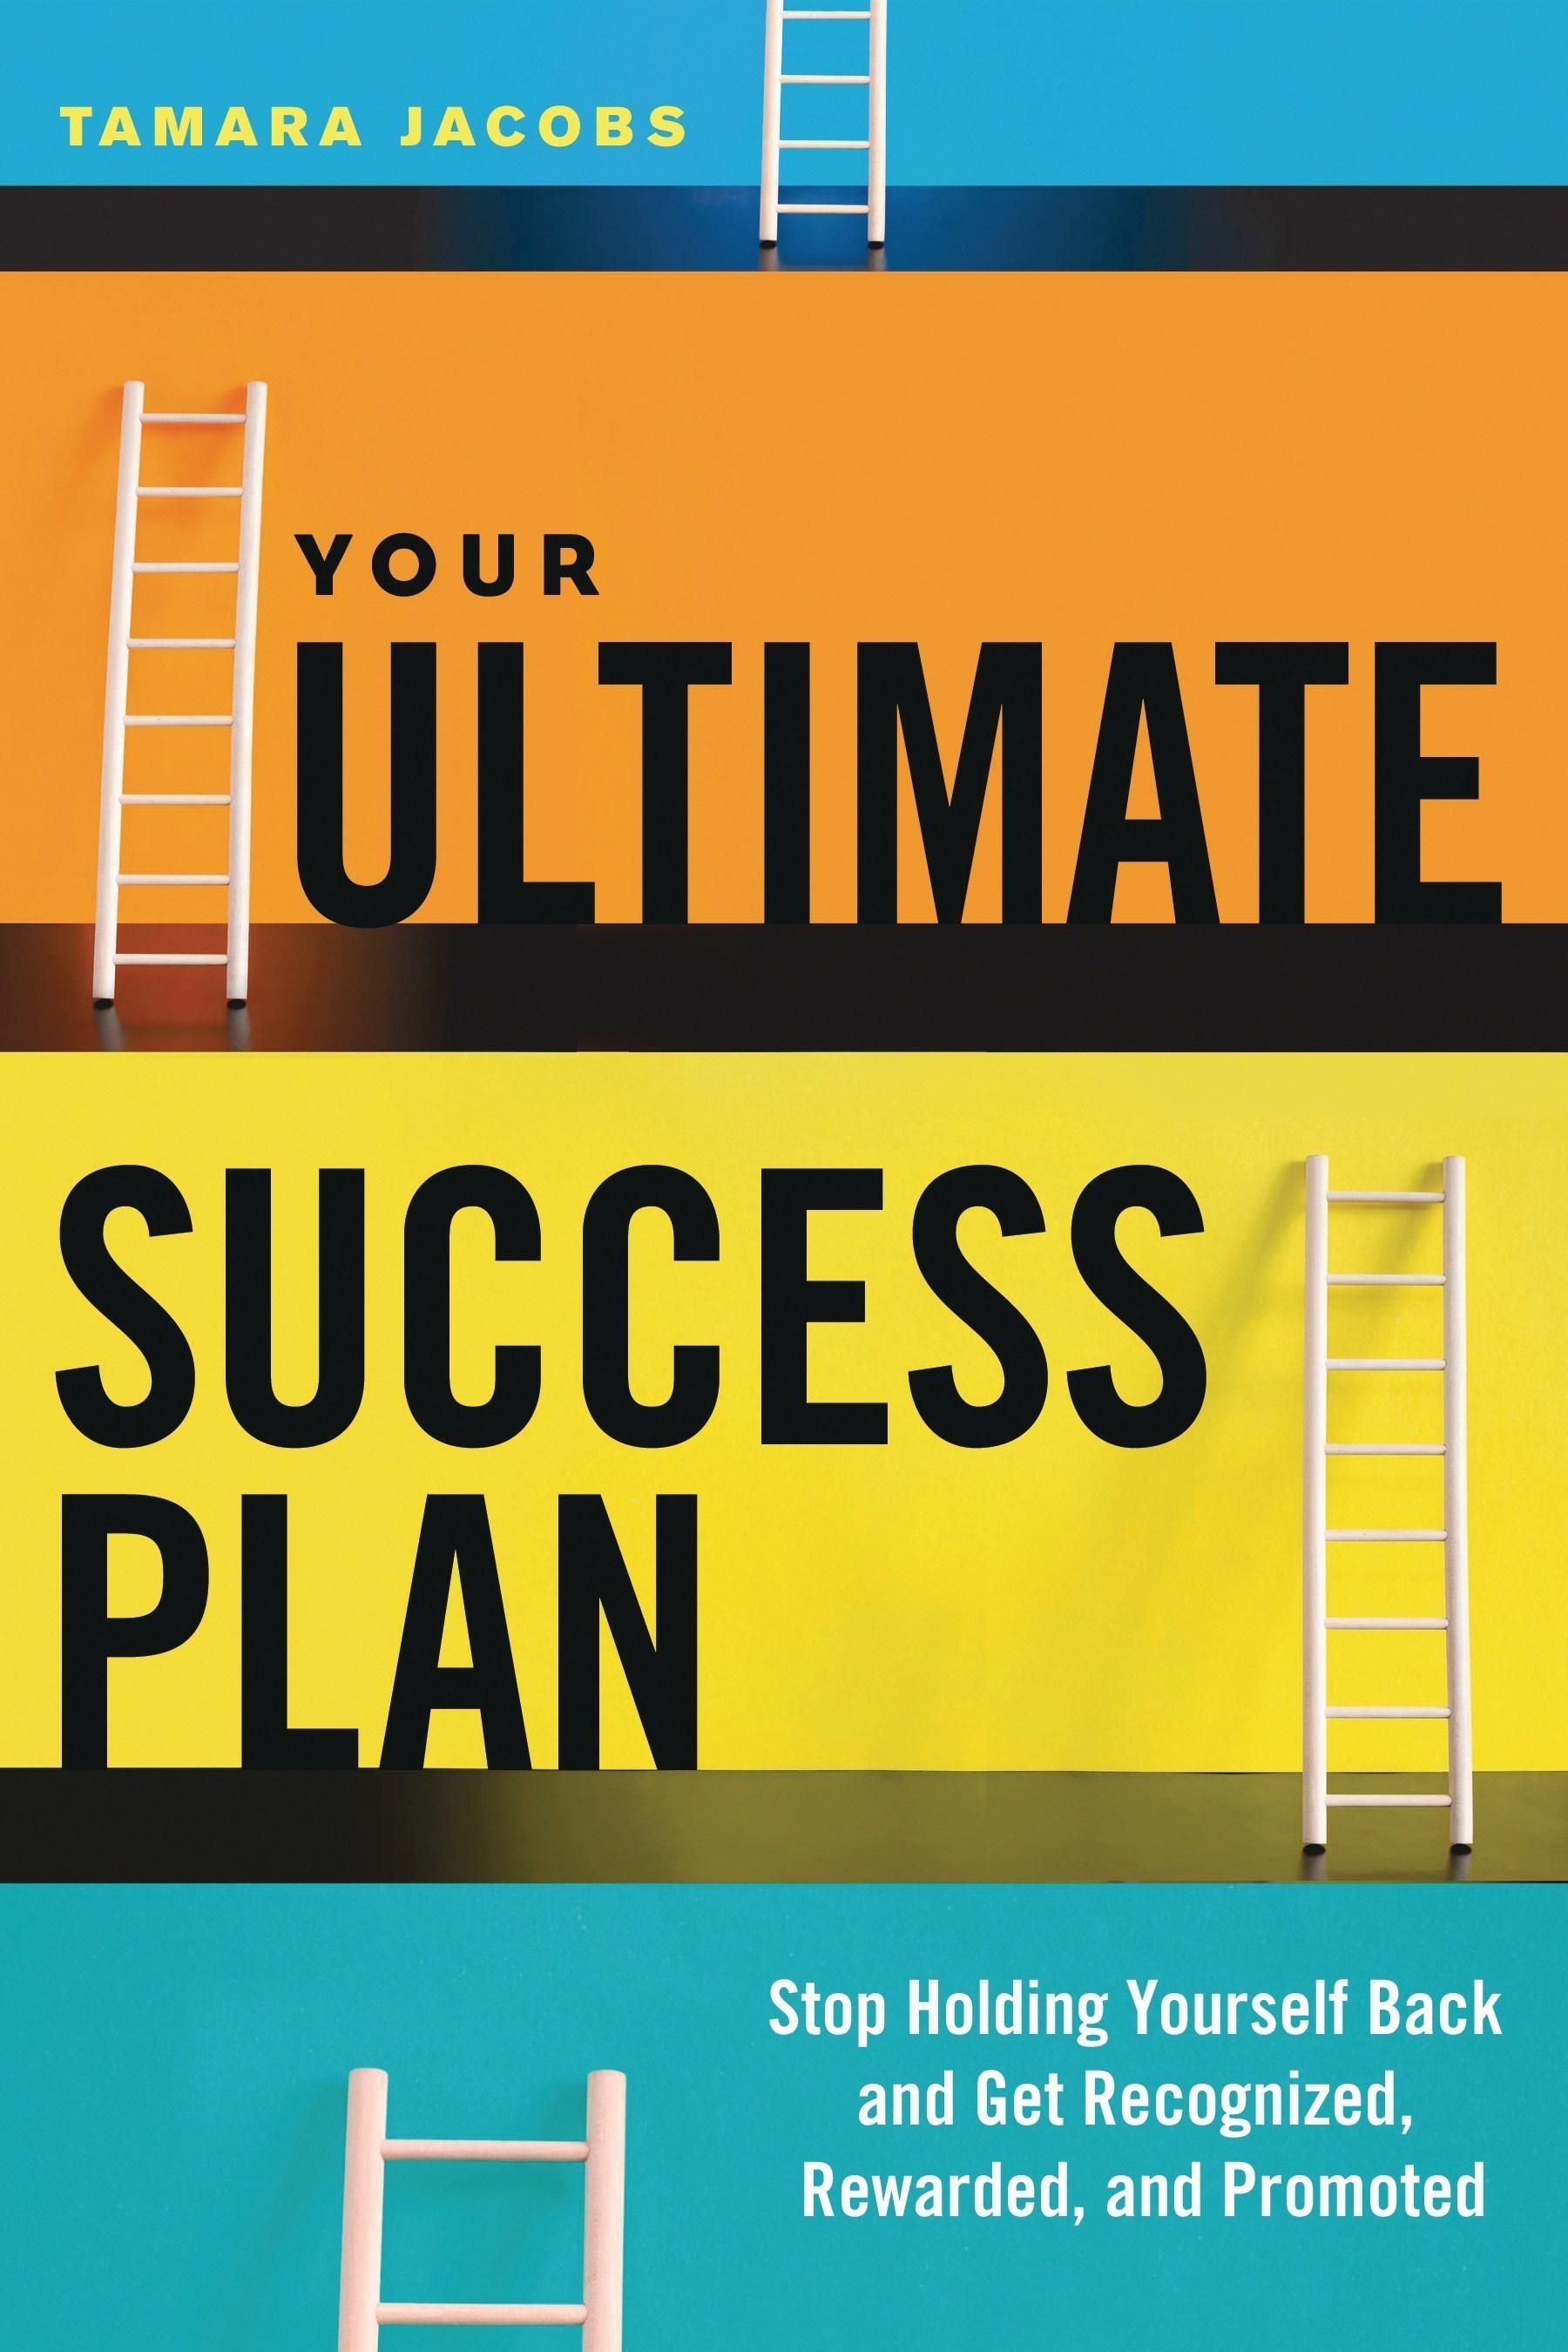 New Book by Best Selling Author Tamara Jacobs: "YOUR ULTIMATE SUCCESS PLAN"    Stop Holding Yourself Back and Get Recognized, Rewarded and Promoted  Published by Career Press, June 2015